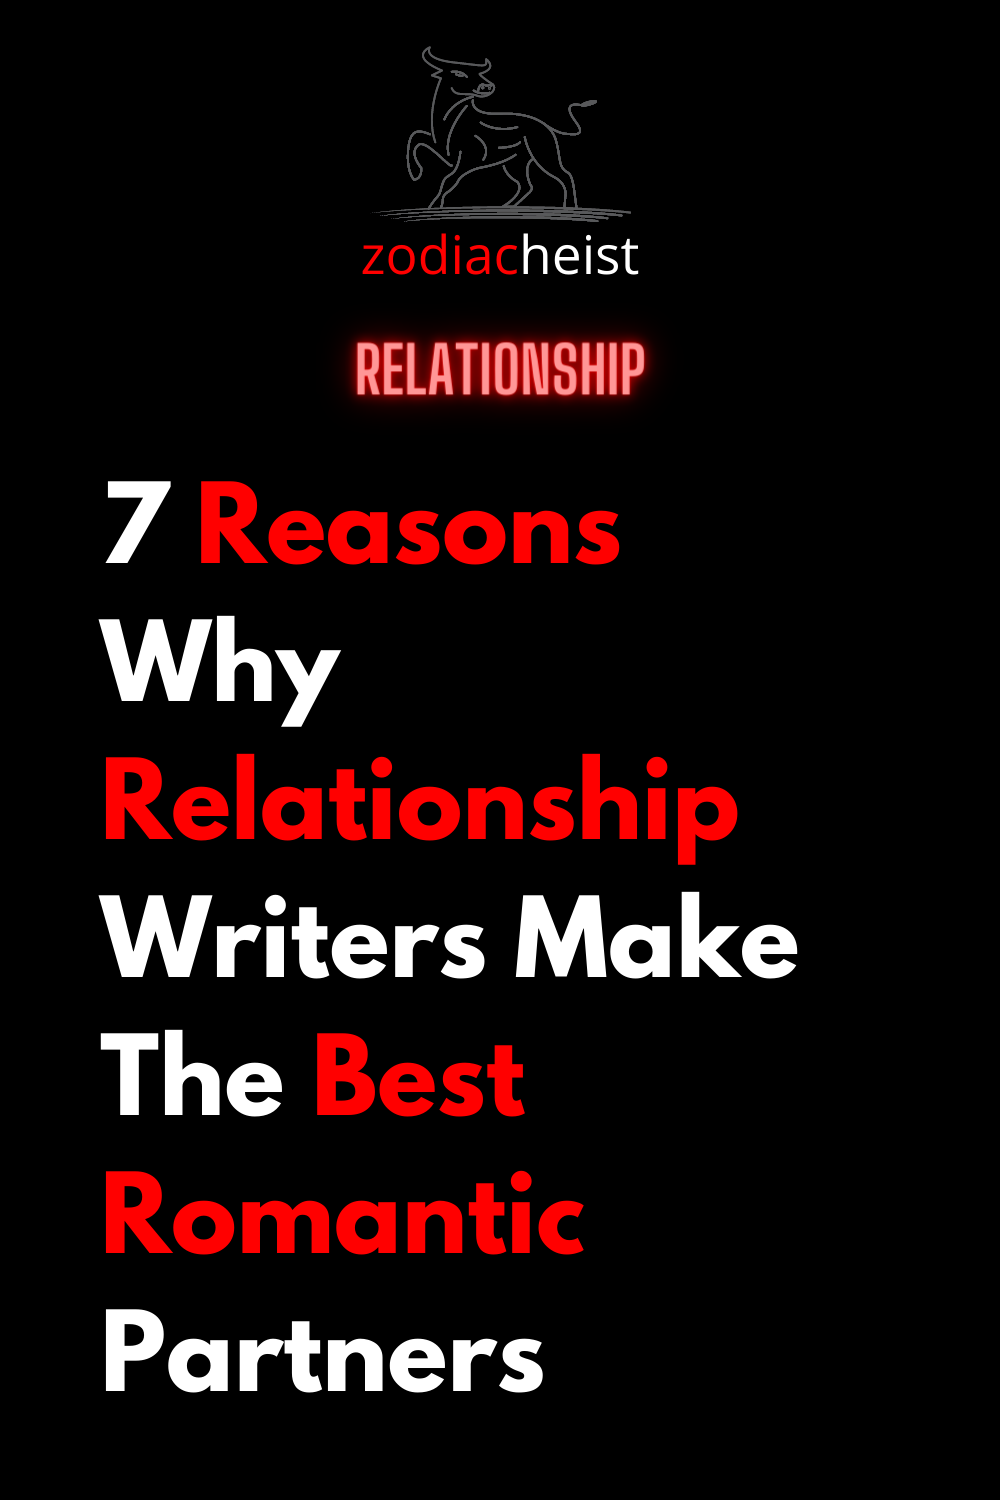 7 Reasons Why Relationship Writers Make The Best Romantic Partners